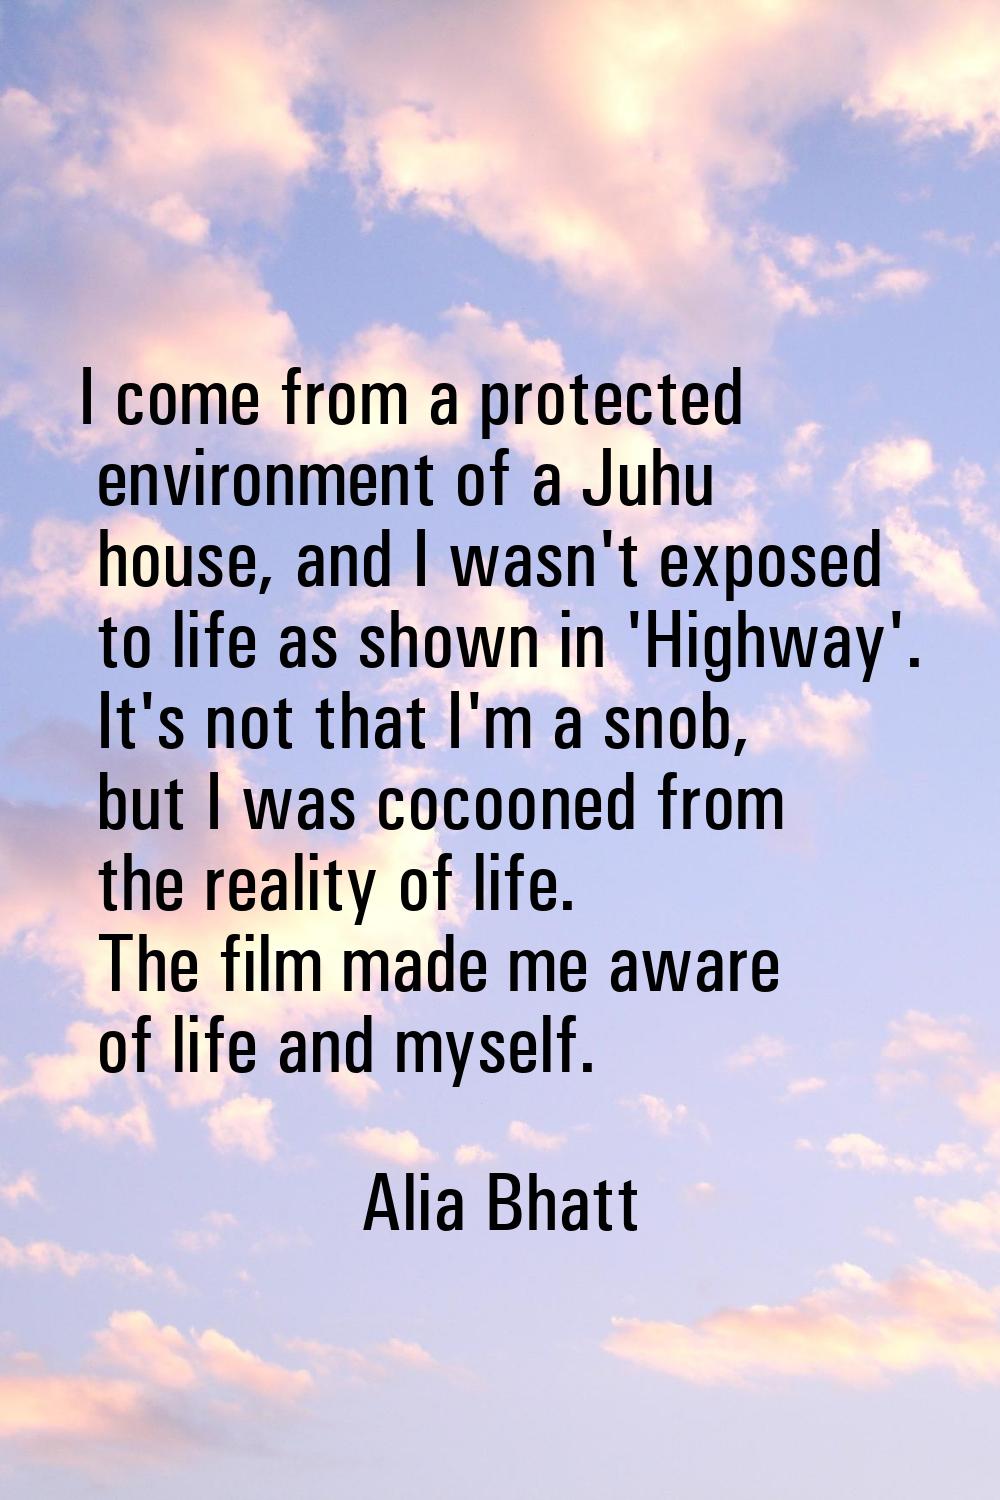 I come from a protected environment of a Juhu house, and I wasn't exposed to life as shown in 'High